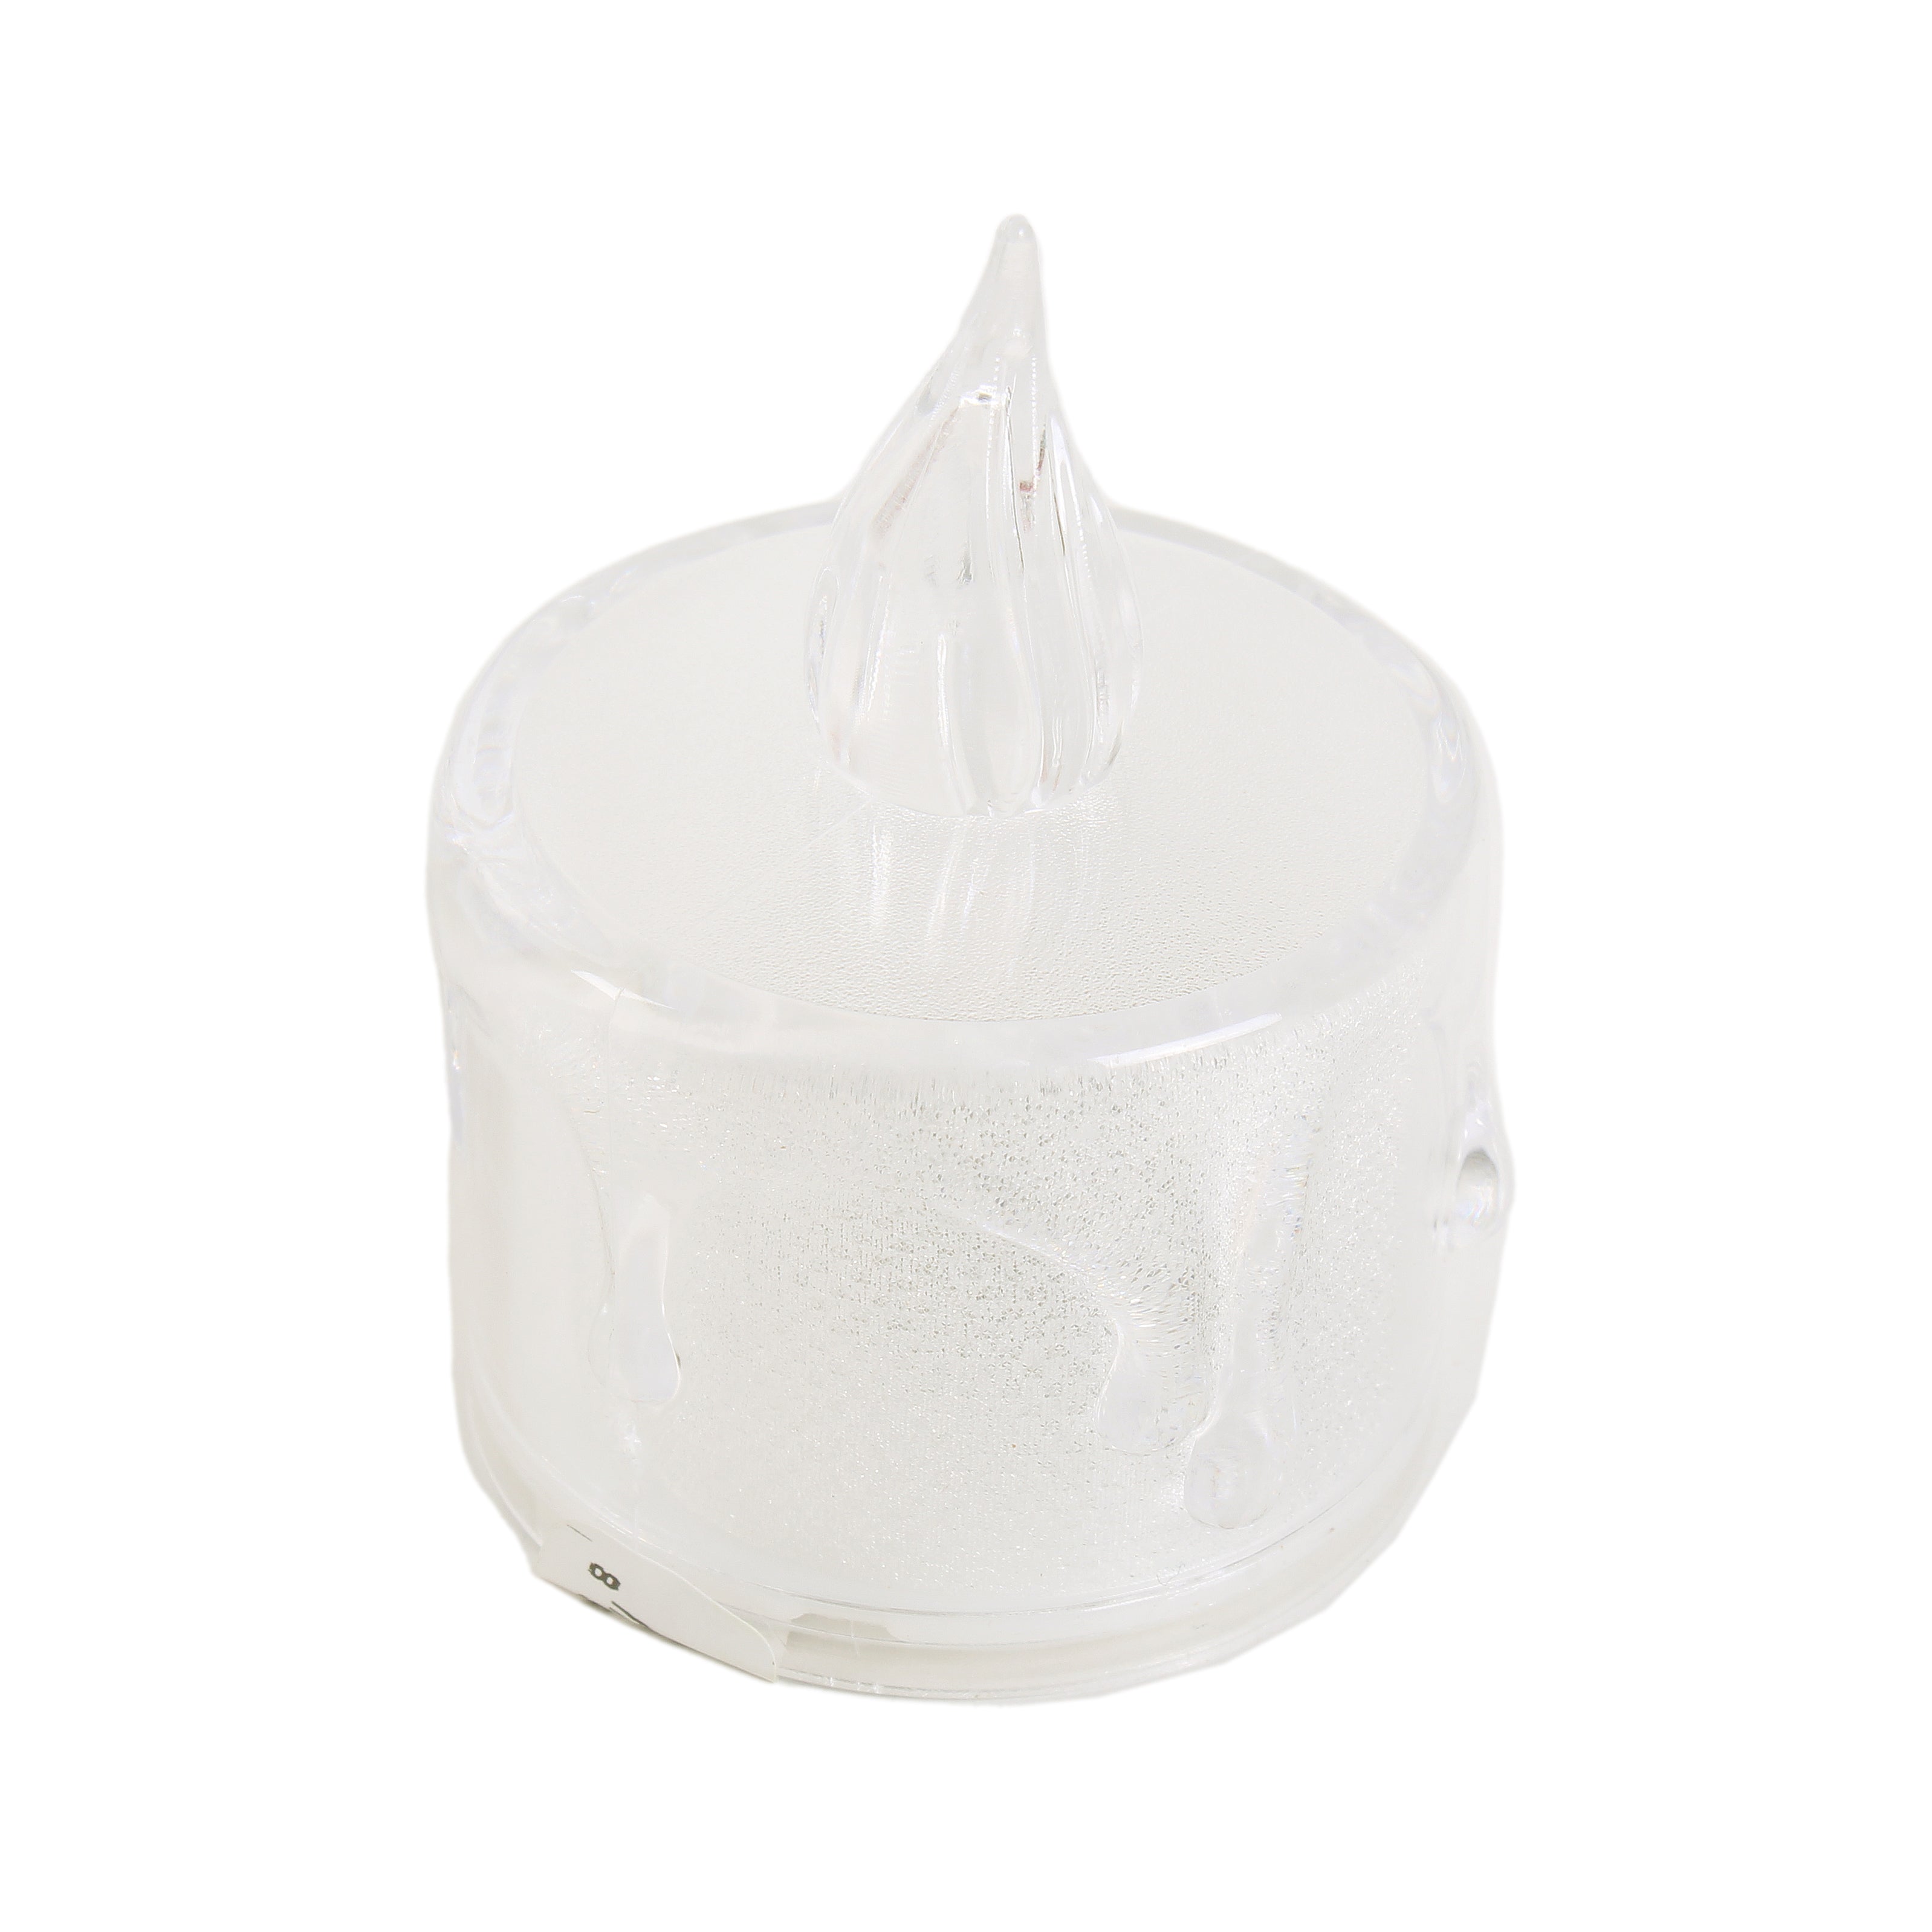 Battery Operated Smokeless Candle With Battery Wram Colour 2inch 1pc Box